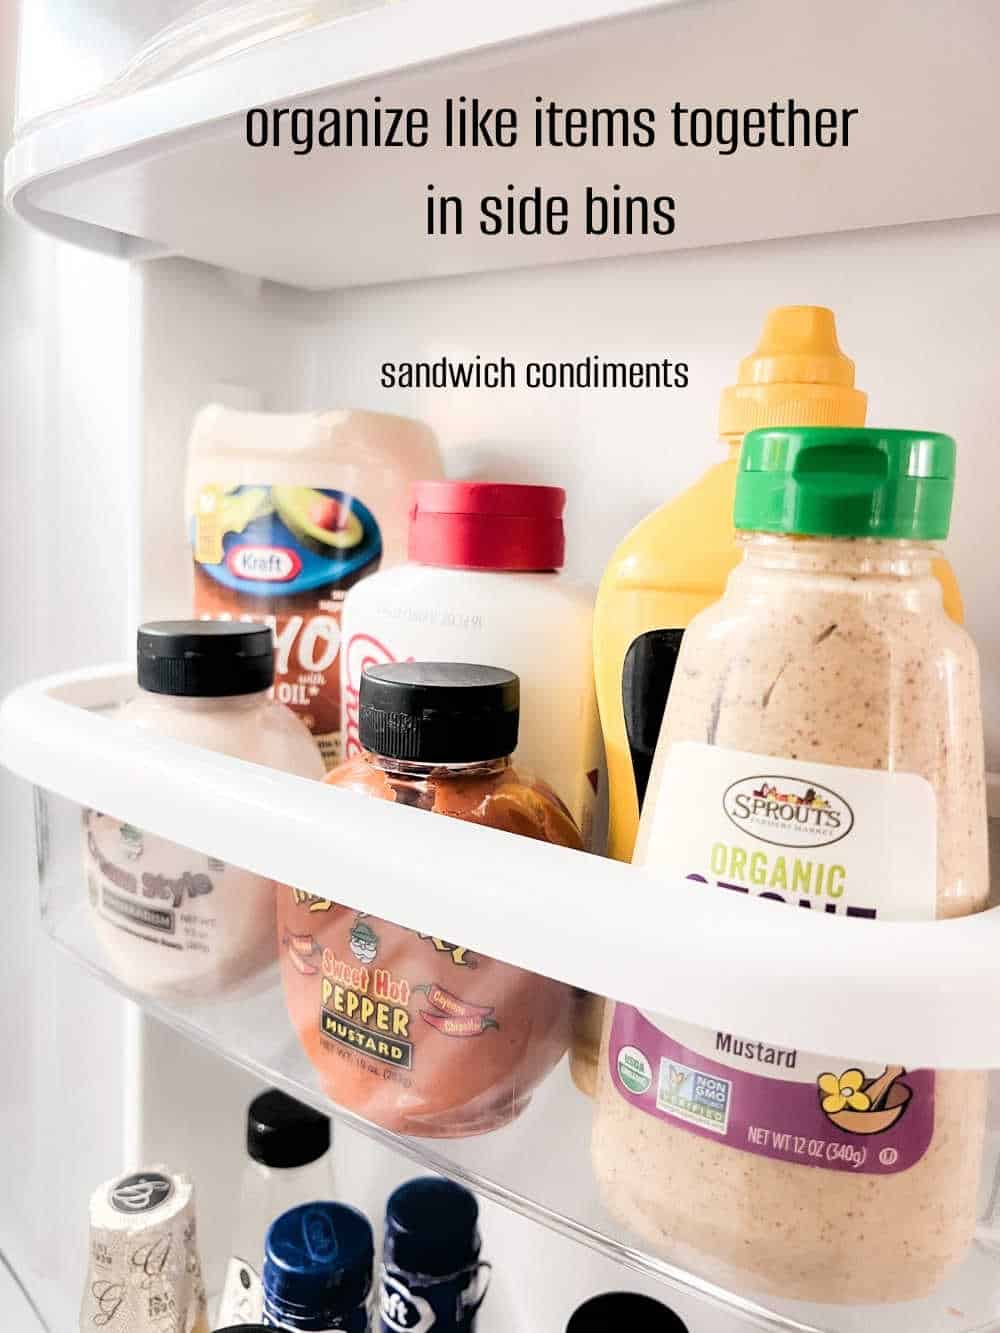 How to organize your fridge. Make the most of your fridge space and stop wasting food with these easy ideas.